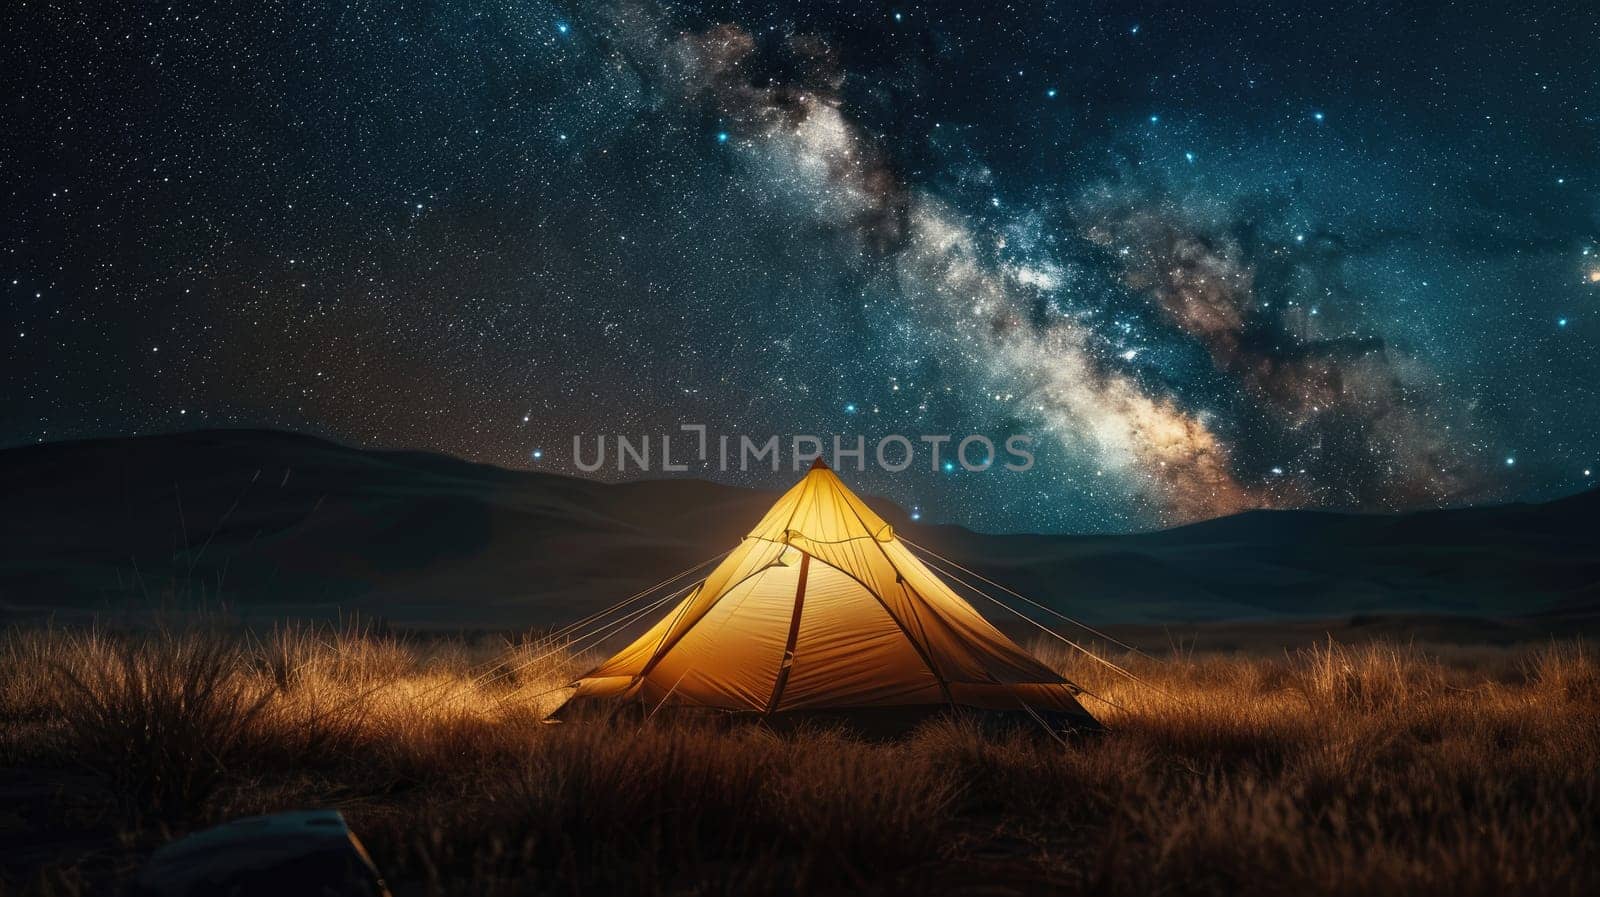 Tent is lit up on the field with a beautiful night sky and stars above, Milky way galaxy.